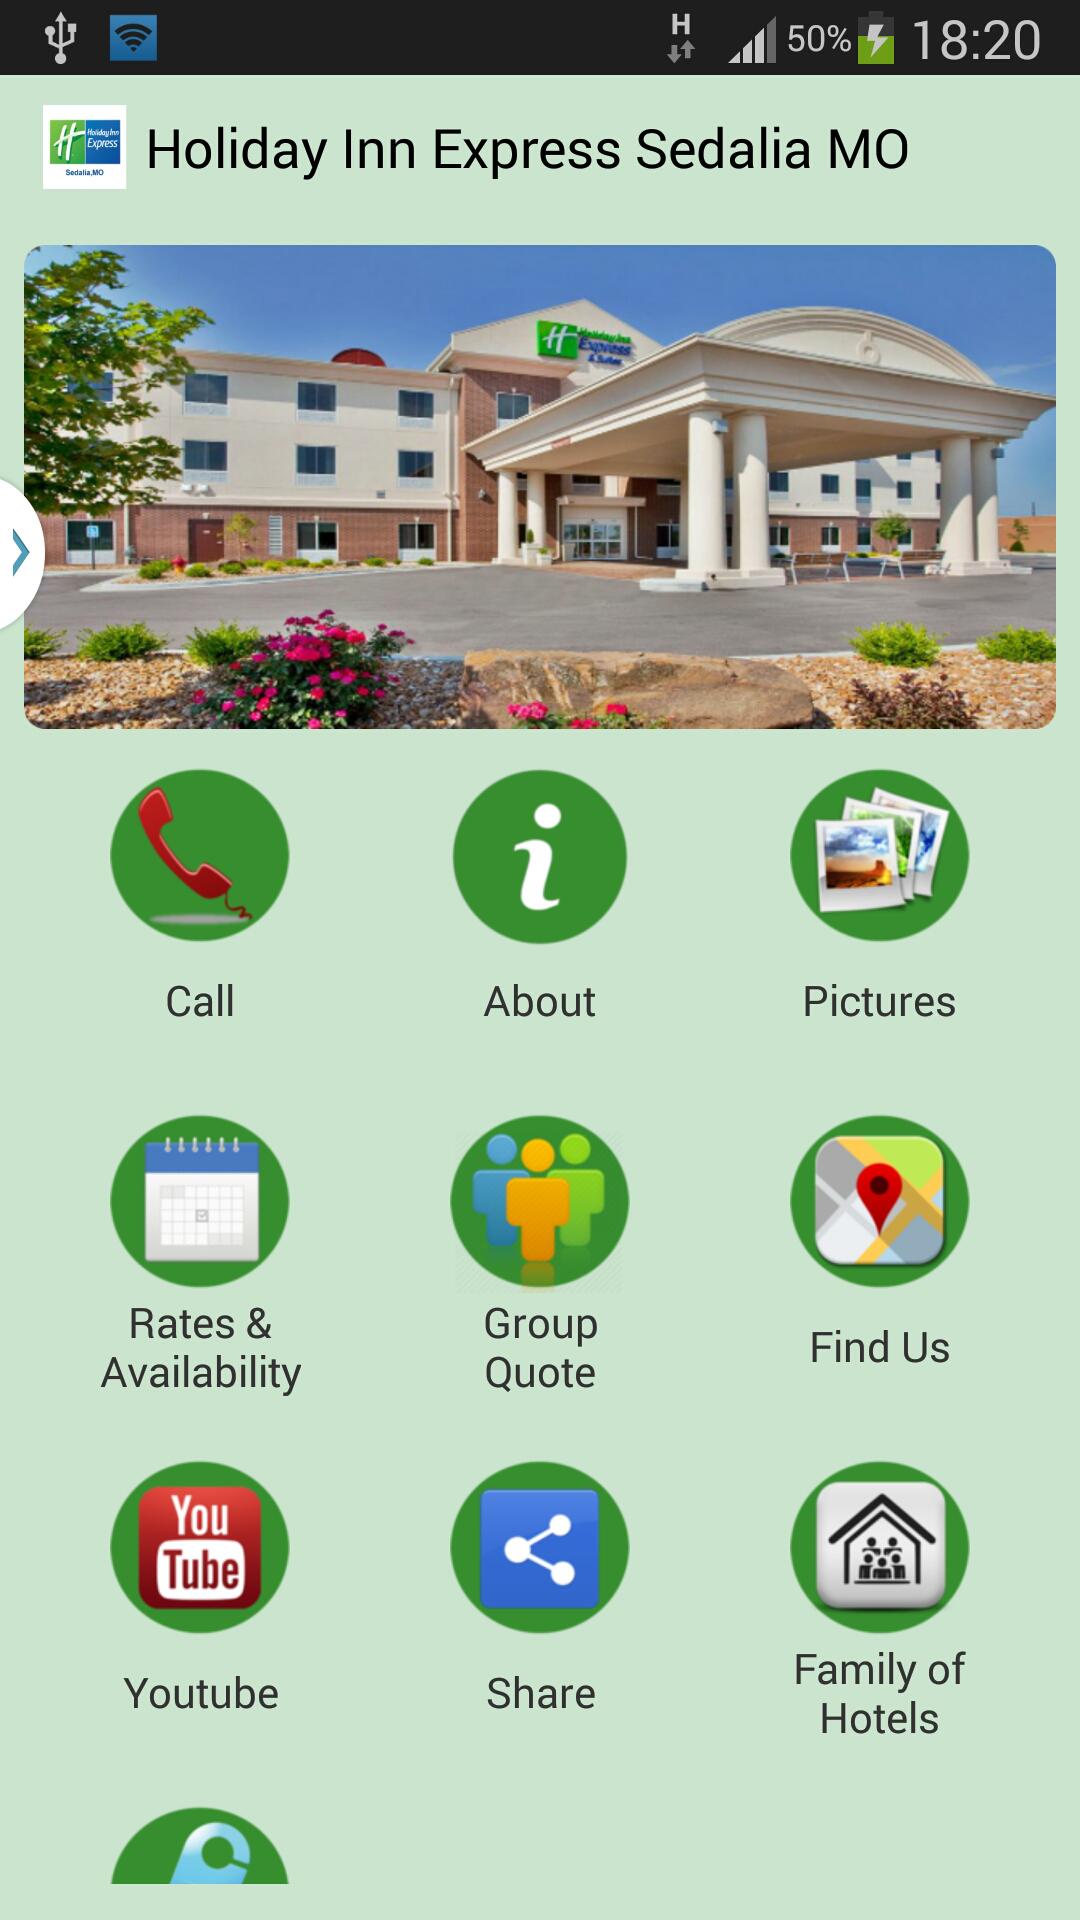 Holiday Inn Sedalia Mo For Android Apk Download - holiday inn hotel roblox roblox video